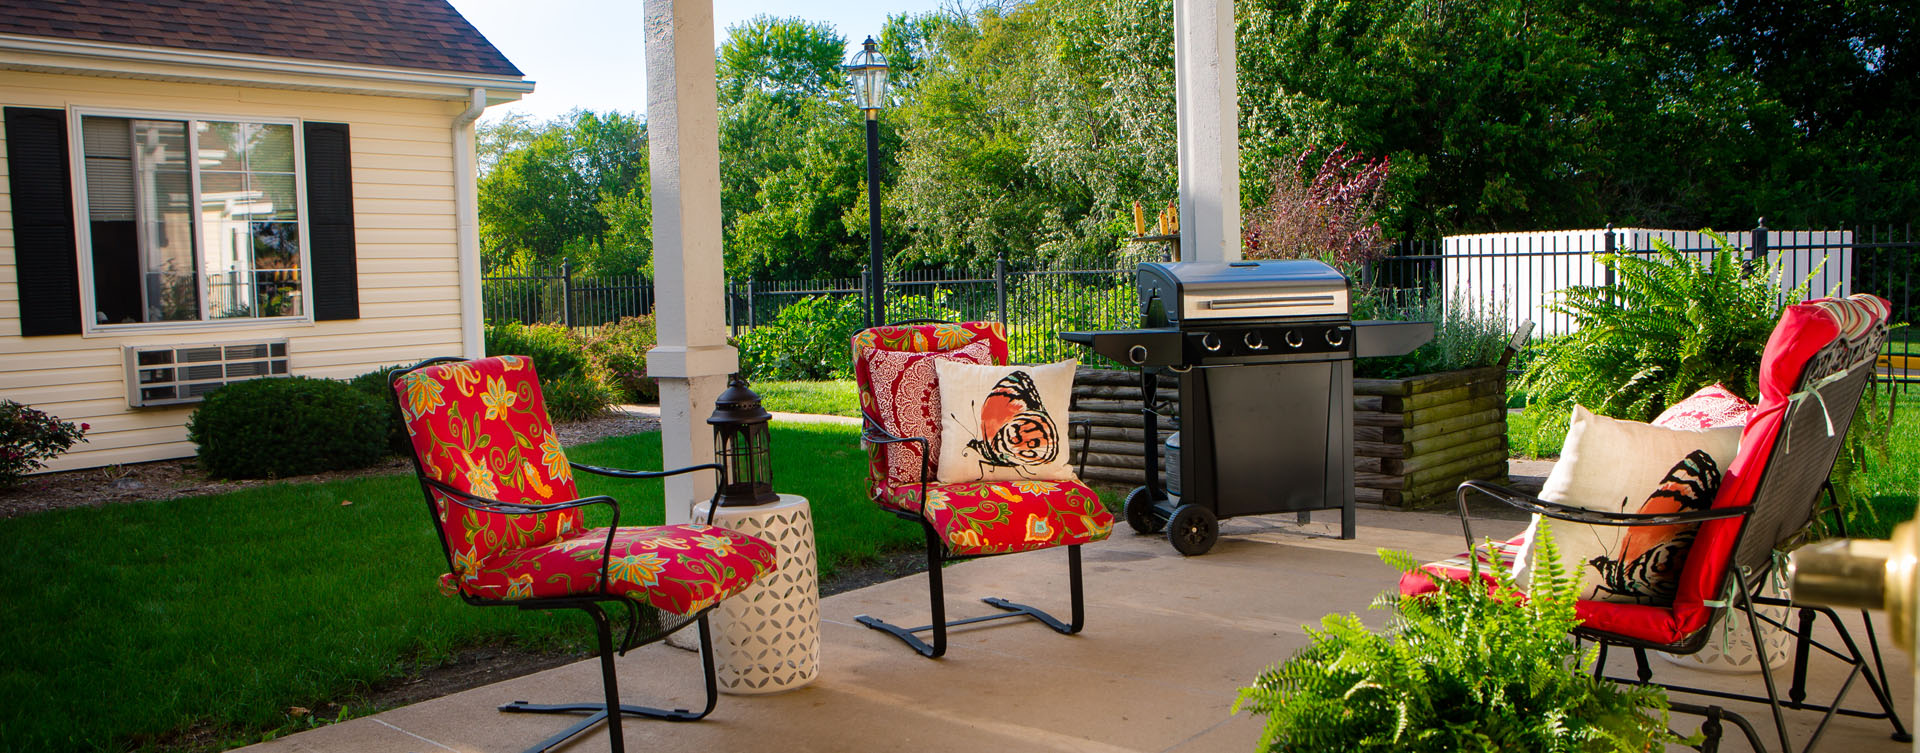 Enjoy bird watching, gardening and barbecuing in our courtyard at Bickford of Macomb